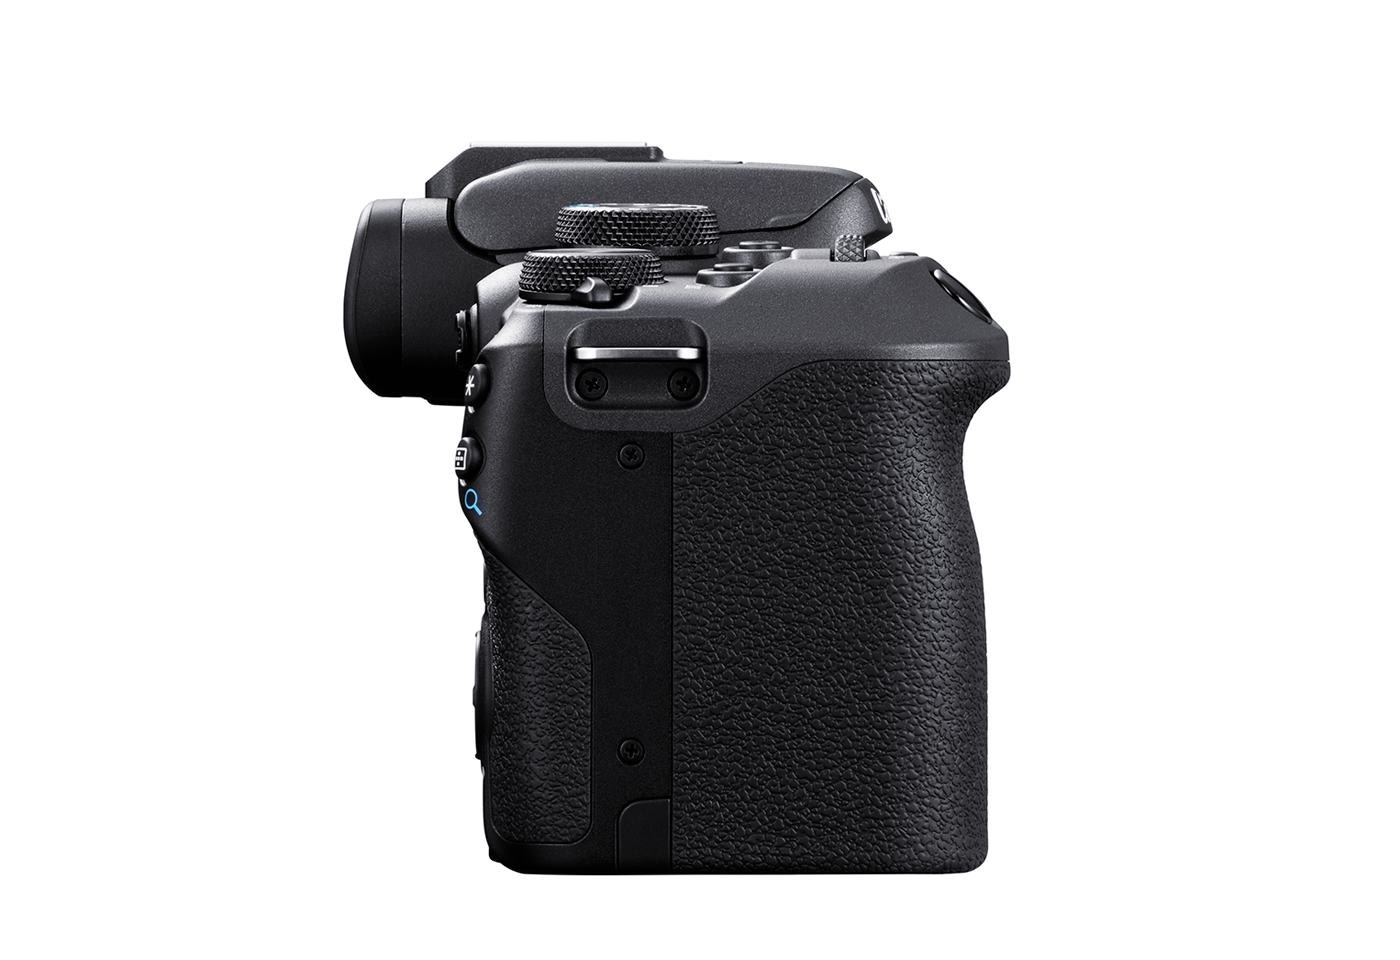 Right side profile image of EOS R10 body only